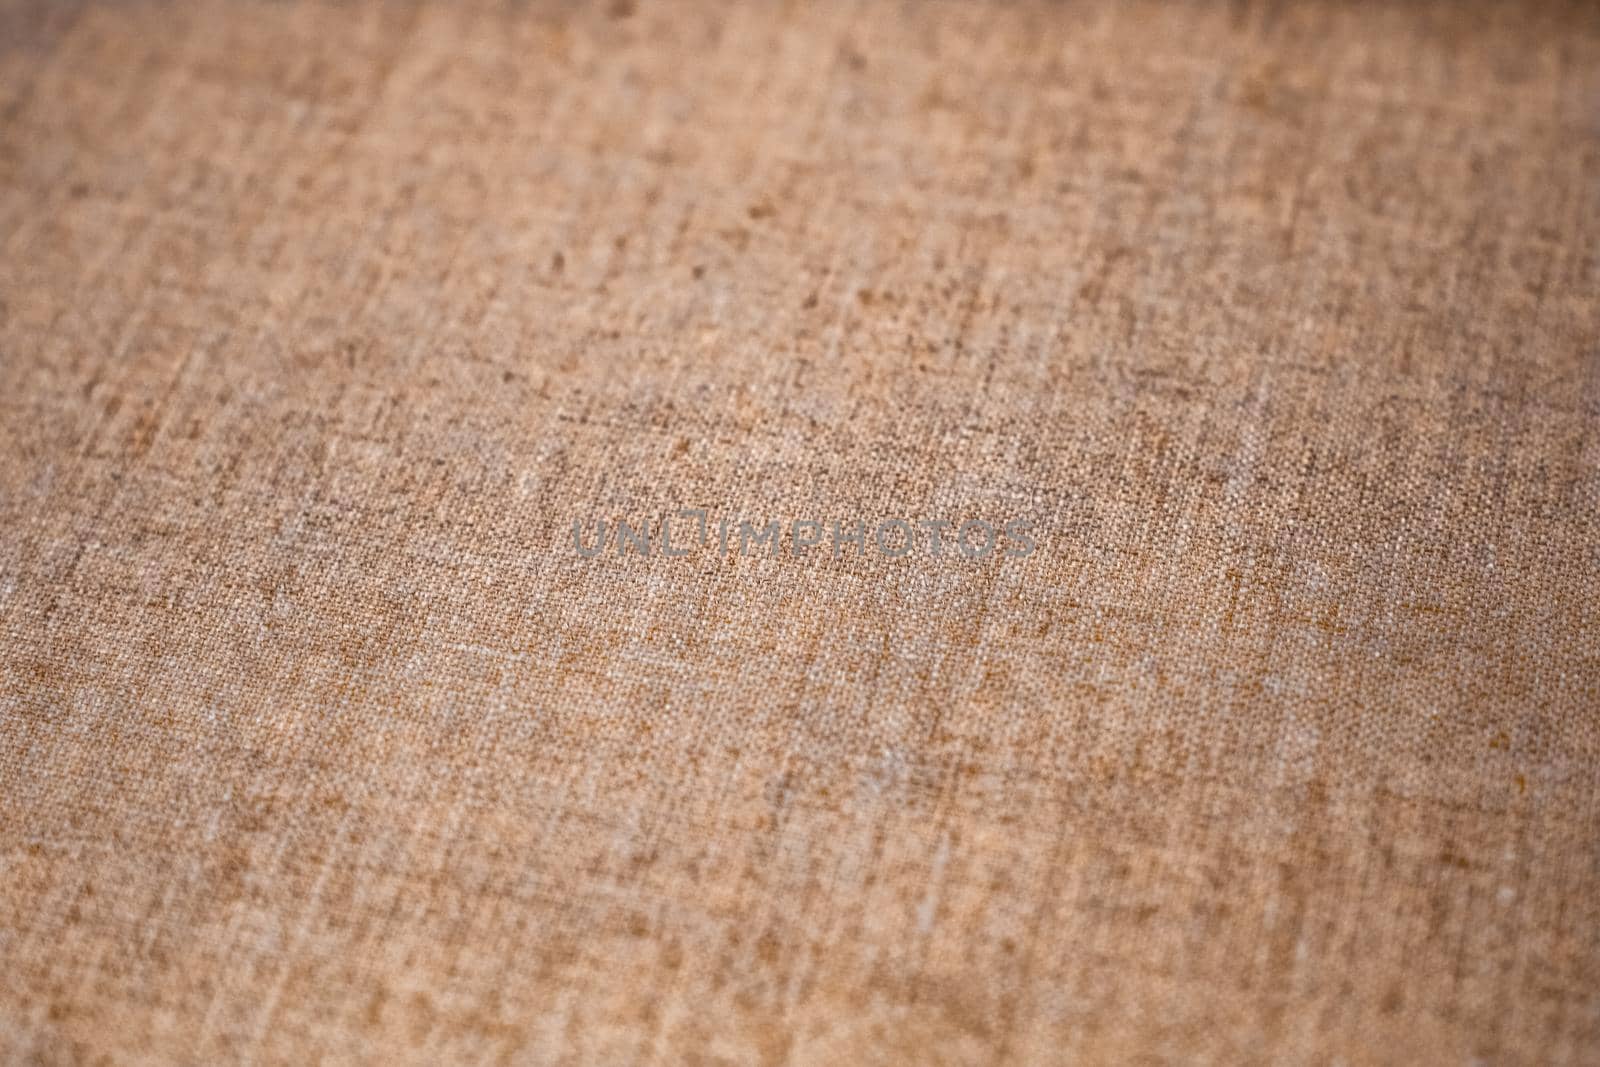 Decorative brown linen fabric textured background for interior, furniture design and art canvas backdrop by Anneleven